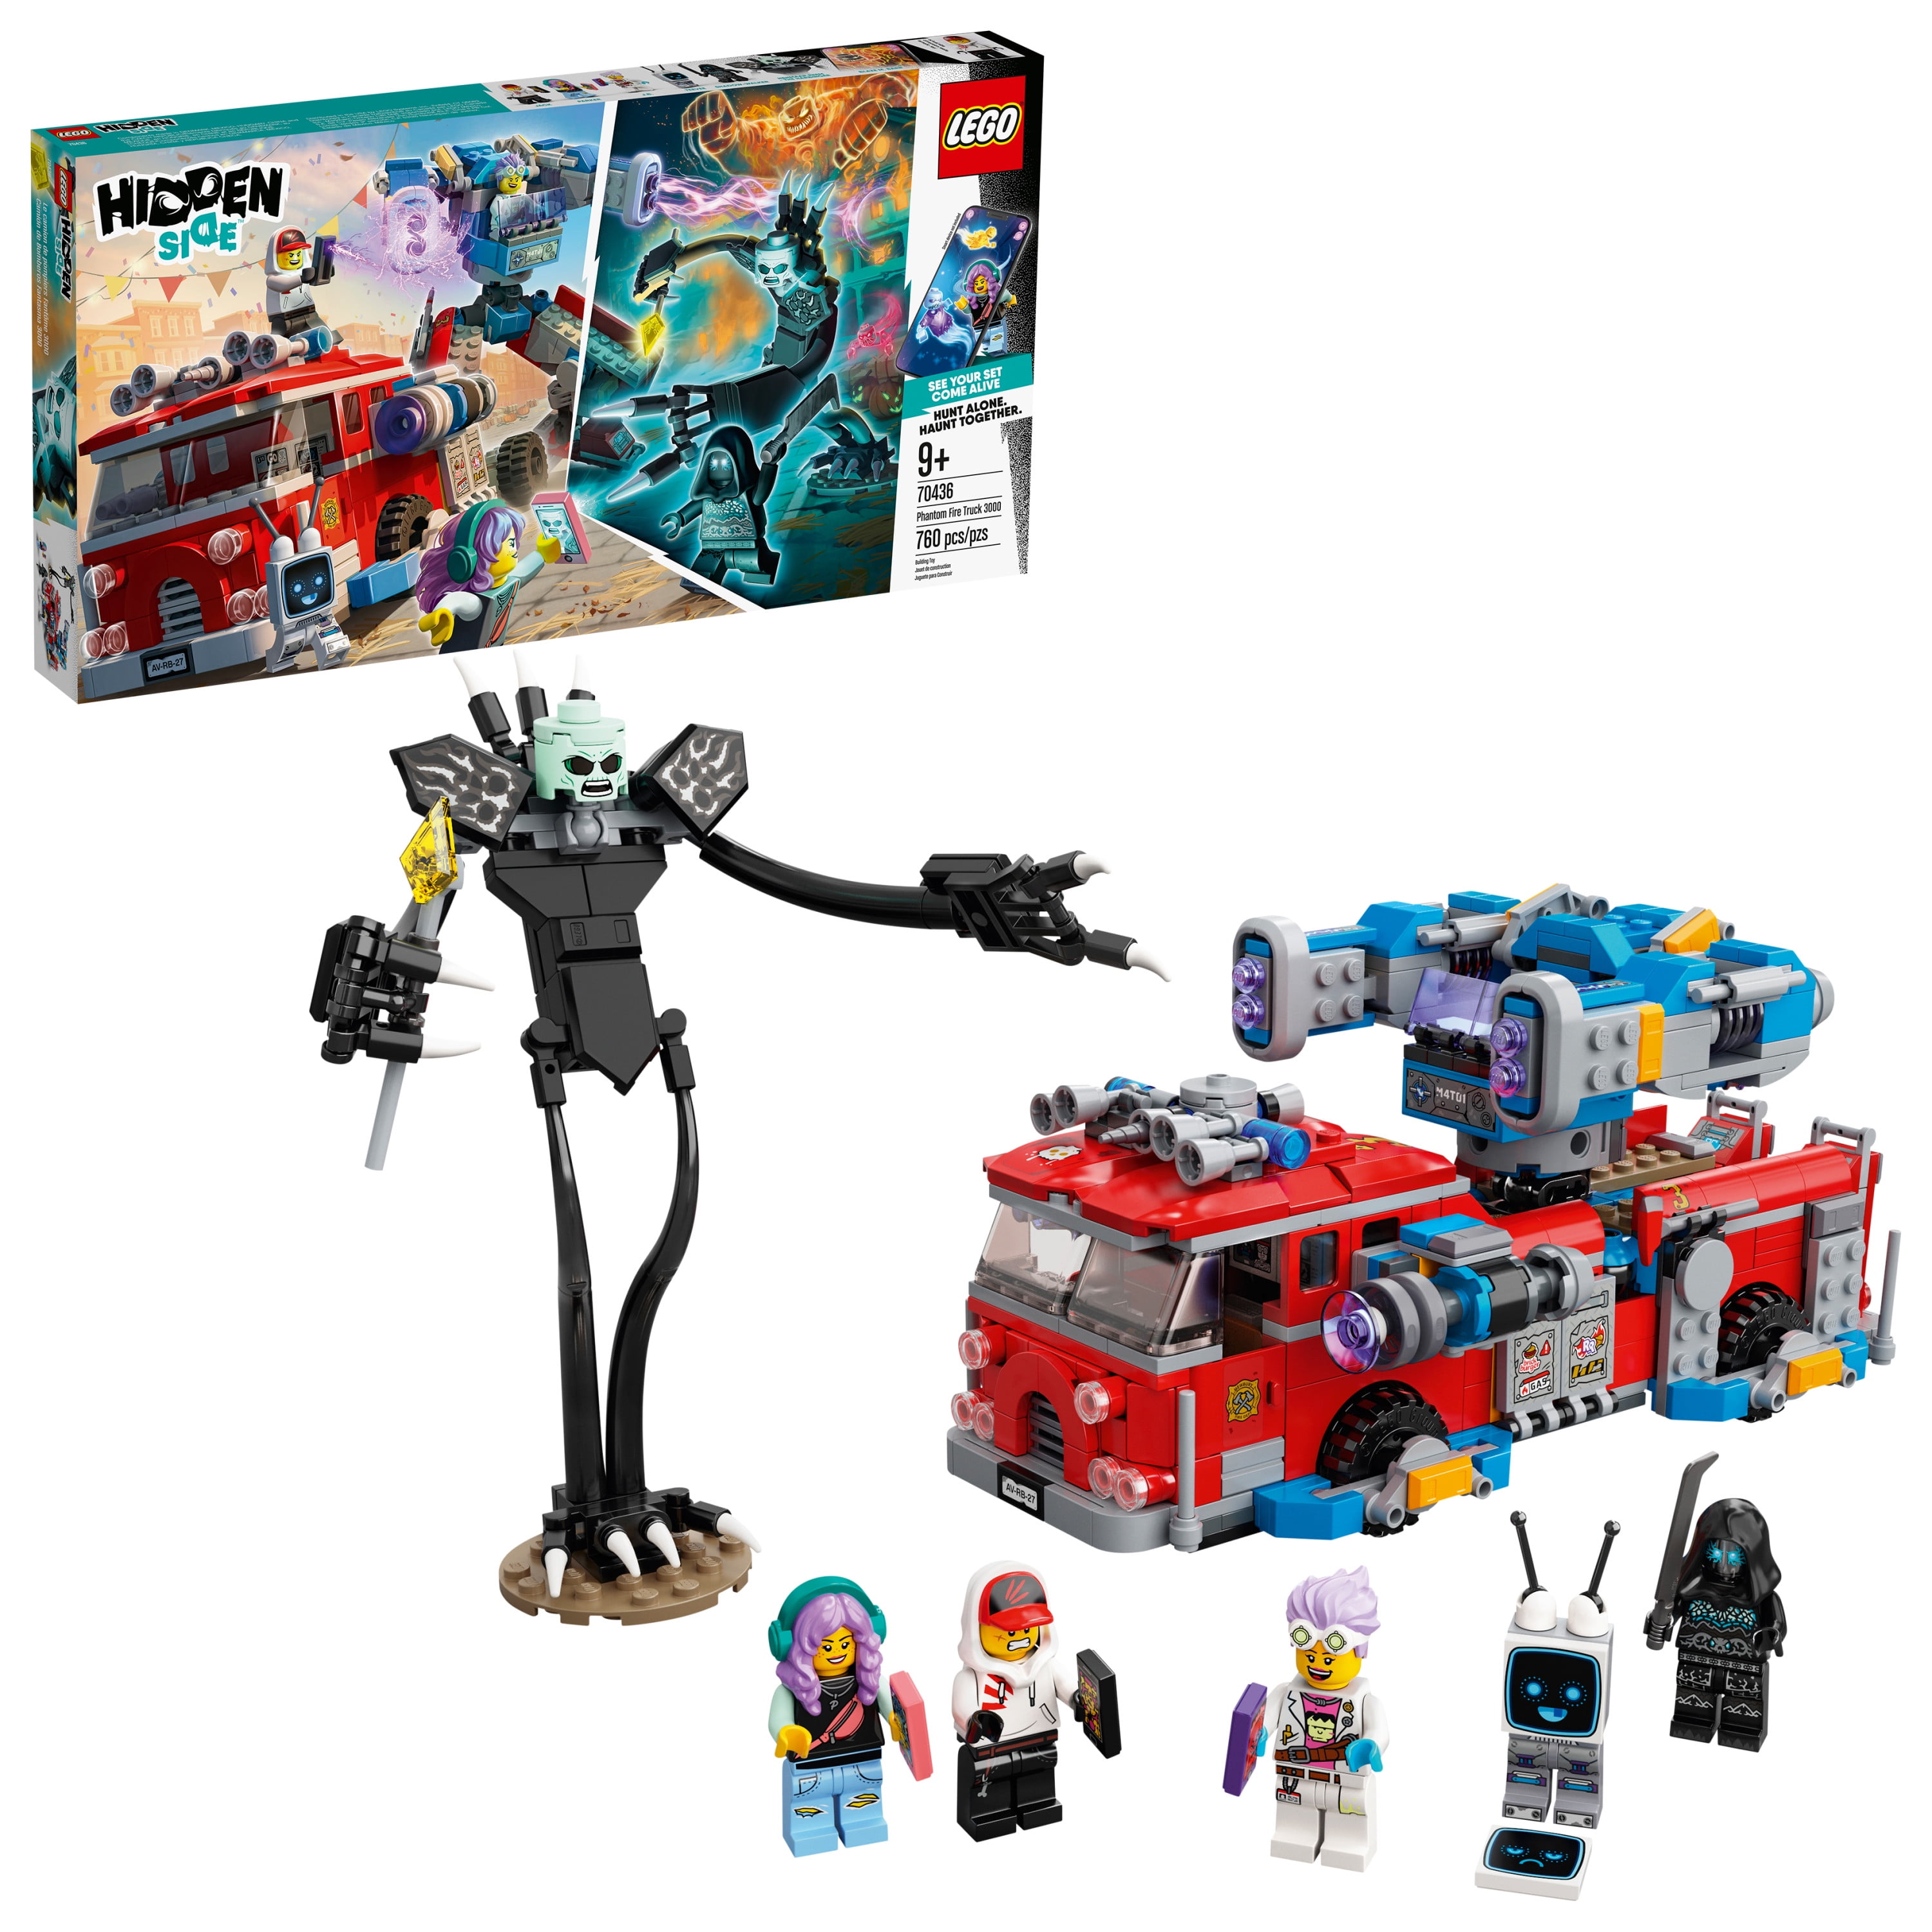 Walmart HIDDEN Clearance - TONS more CHEAP LEGO and TOYS I bought to resell  on  FBA &  